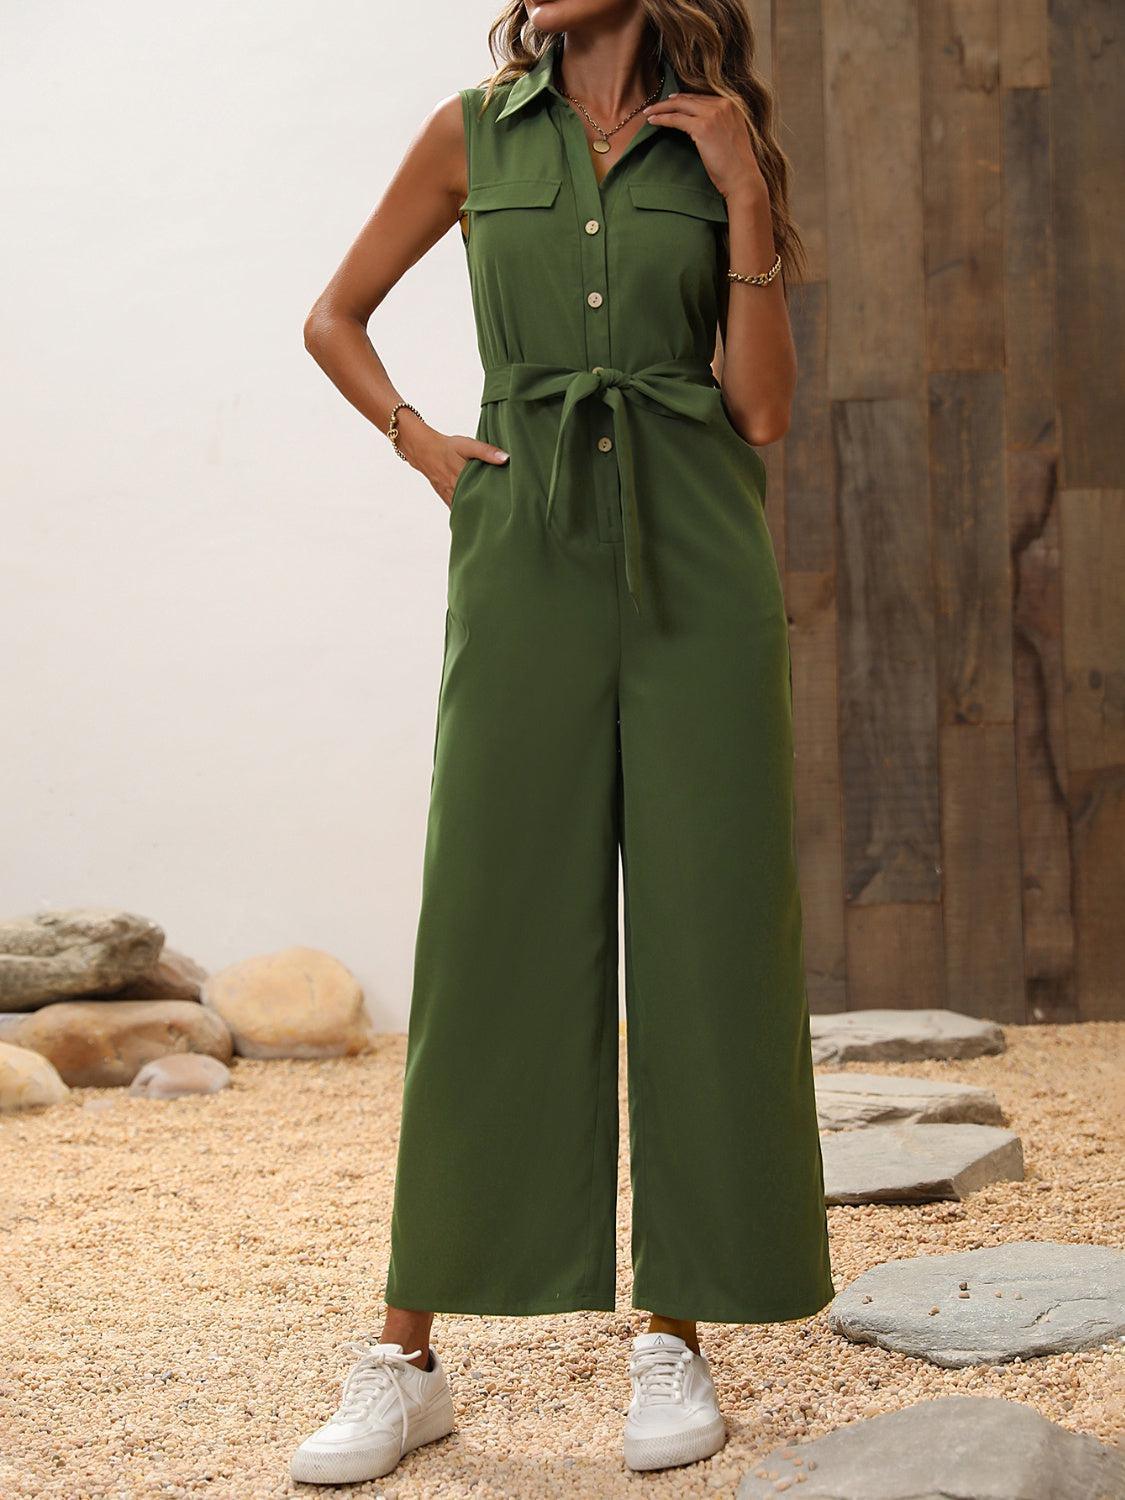 a woman wearing a green jumpsuit and white sneakers